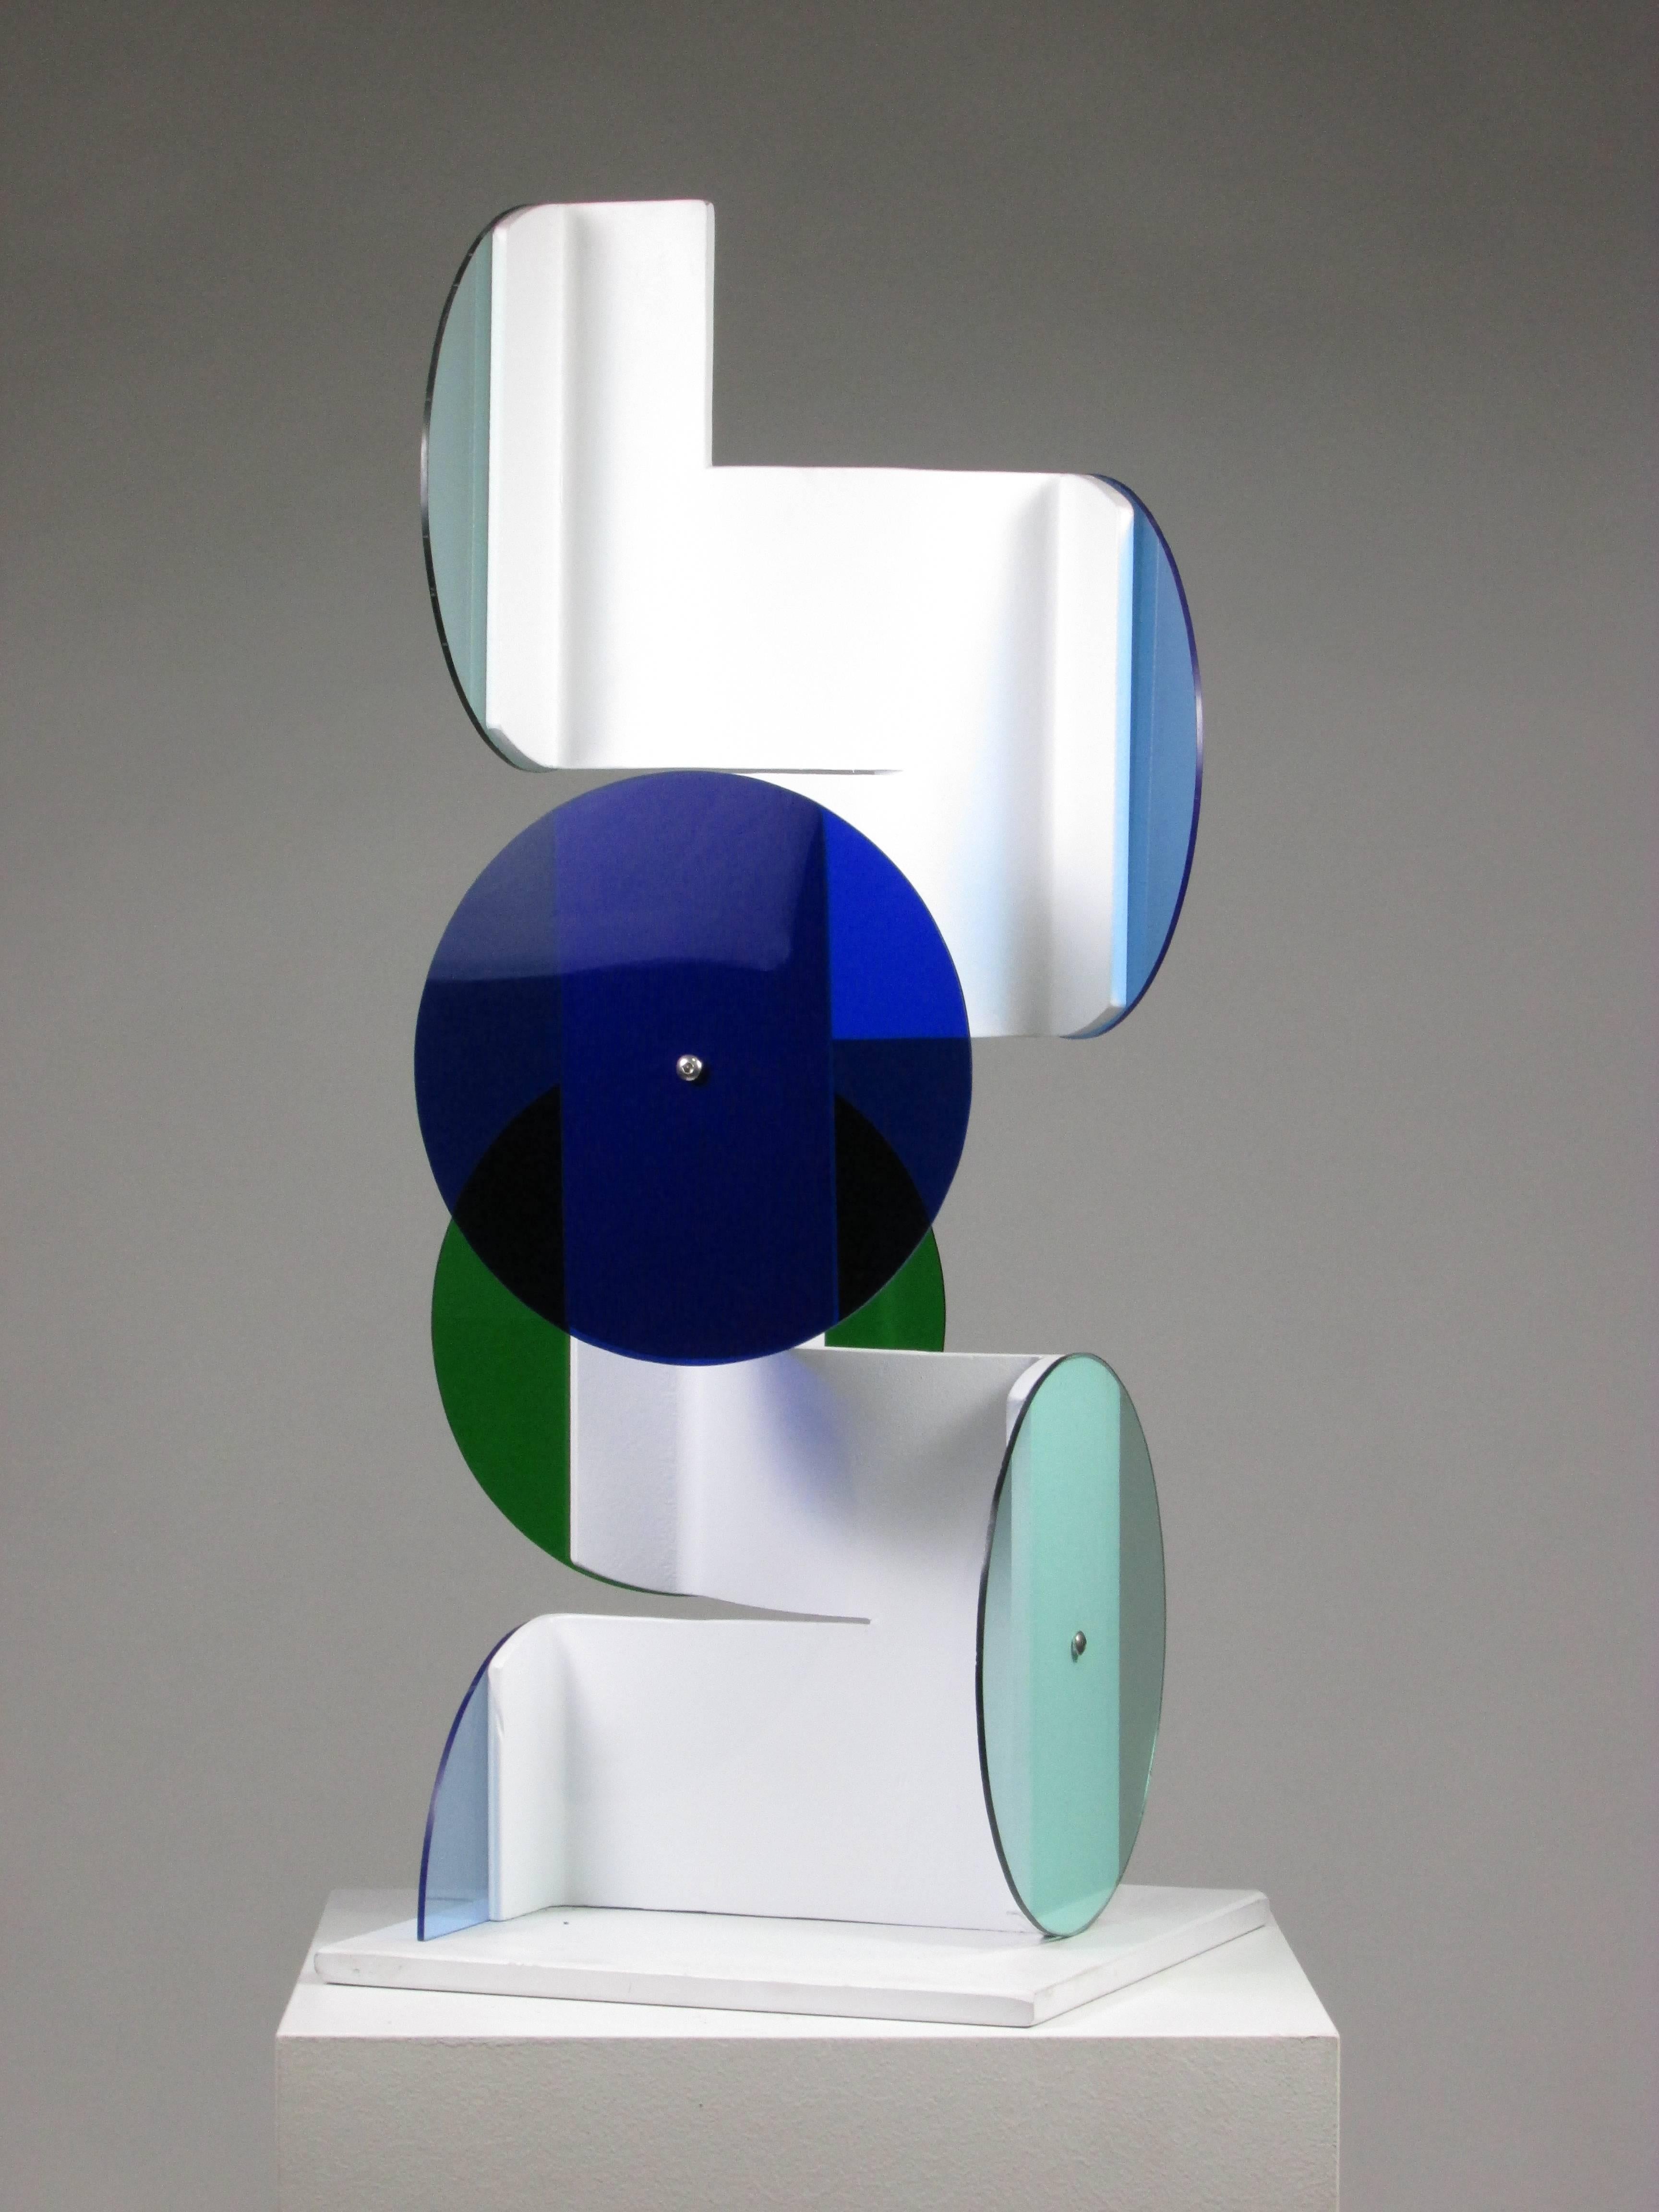 Edwin Salmon, "Five Brothers, Fireproof", 2015-16, Painted Steel I Beam and Acrylic Sheet, 25" x 12" x 12"
Sculpture will ship disassembled and will require assembly.

"Fireproof" is from Edwin Salmon's